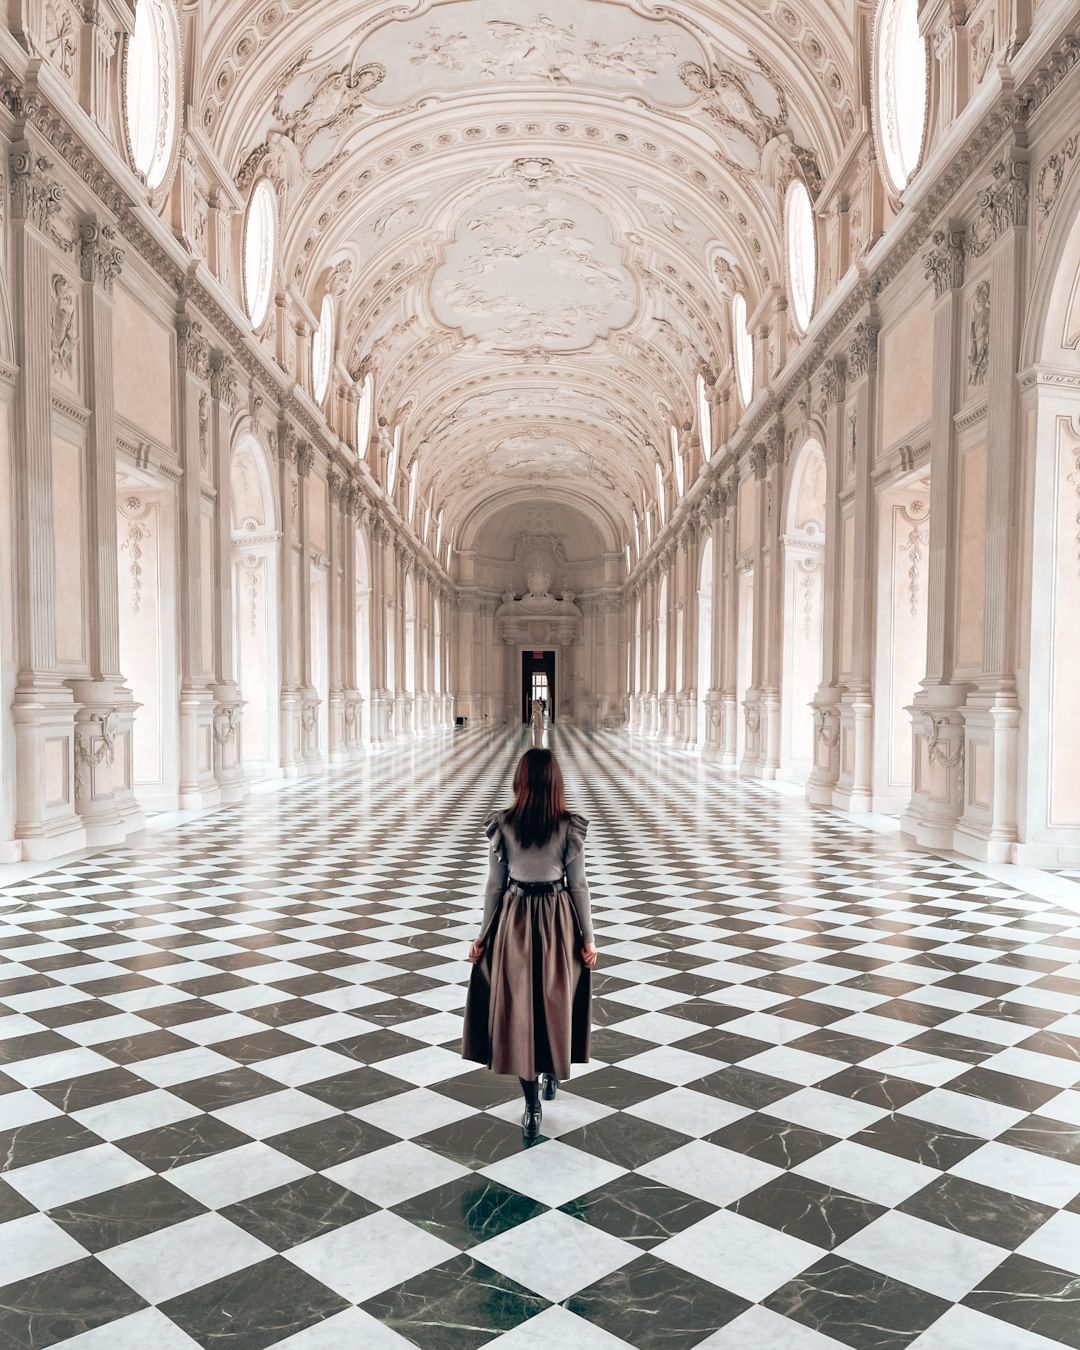 What to see at the Palace of Venaria Reale in Turin